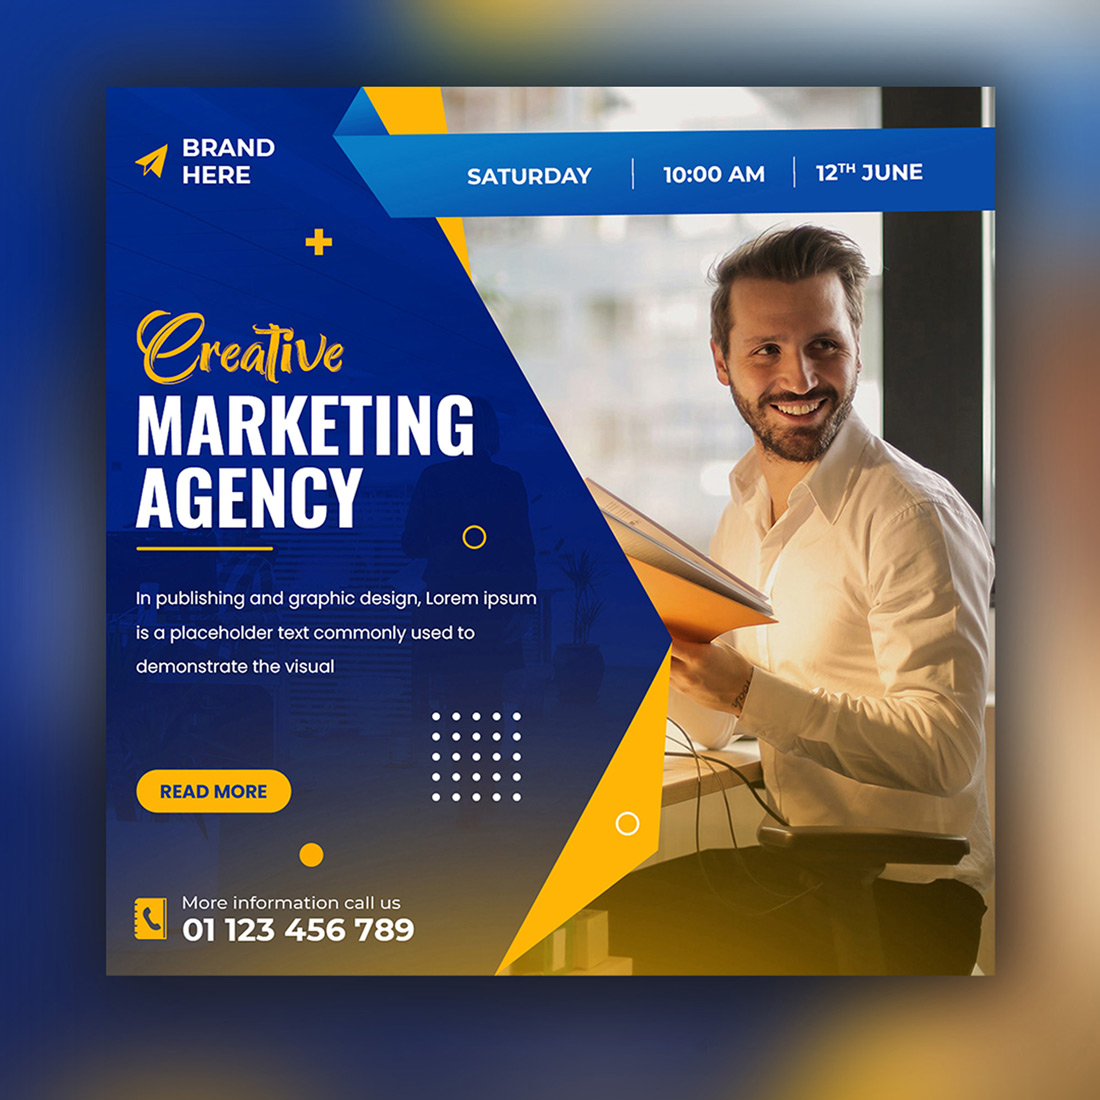 Blue and yellow flyer for a marketing agency.